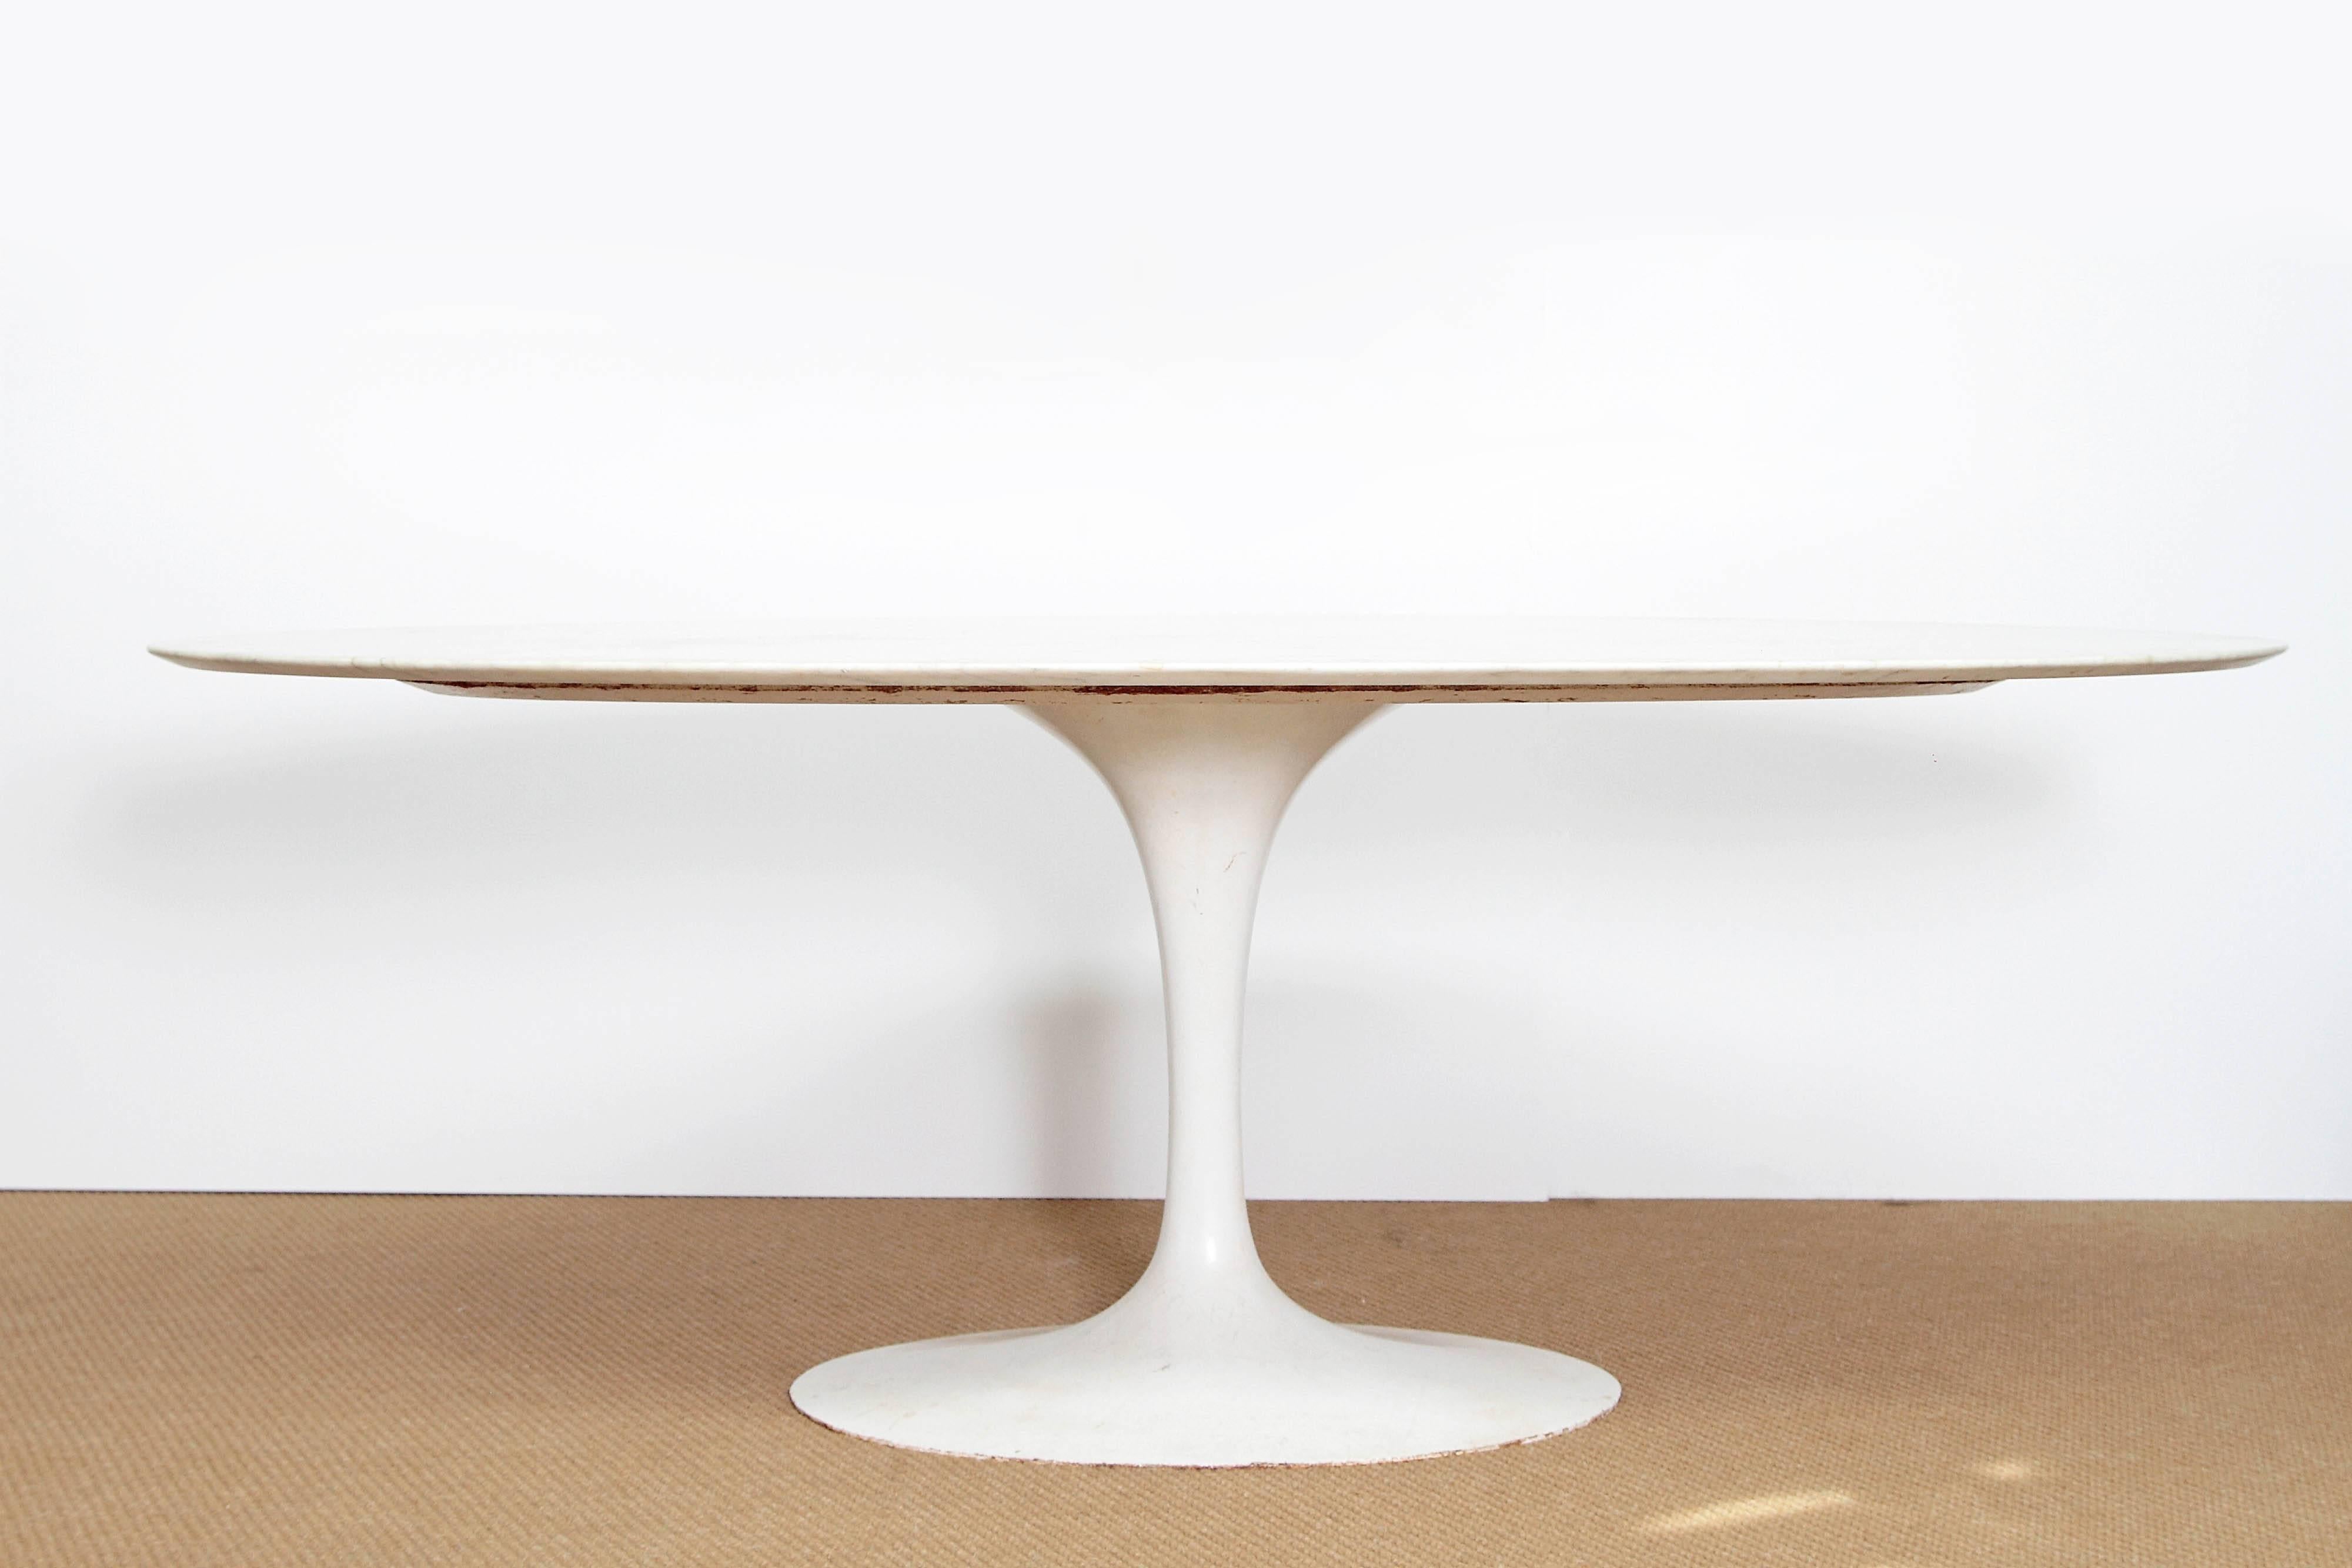 vintage 1960s Eero Saarinen tulip dining / small conference table for Knoll, white Carrara marble elliptical top with knife edge on enameled pedestal base

from the Estate of Lucille "Lupe" Murchison (1926-2001), Dallas socialite /